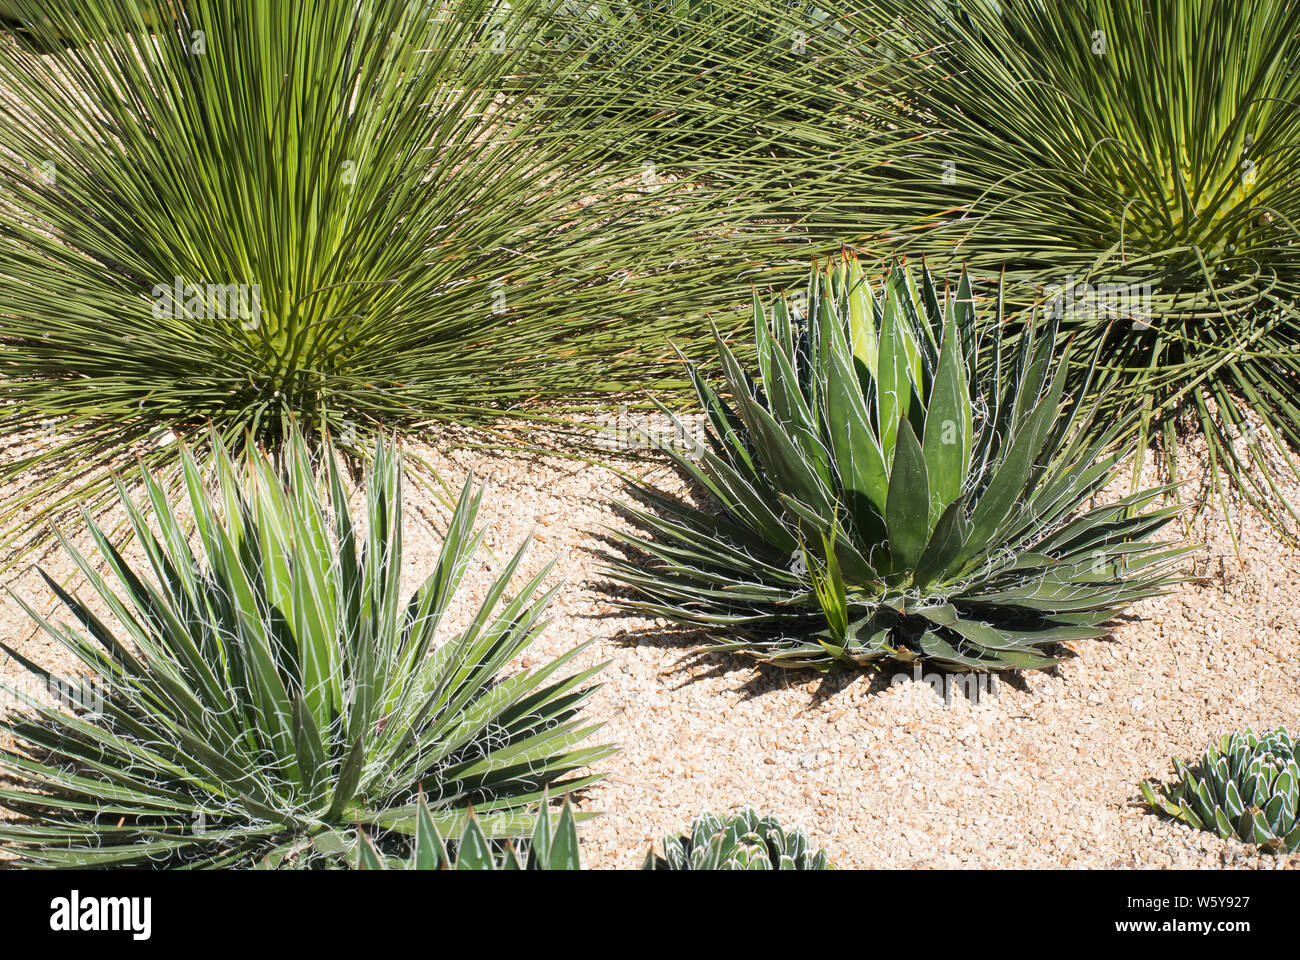 Dry Garden in Public Park Featuring Agave Stock Photo